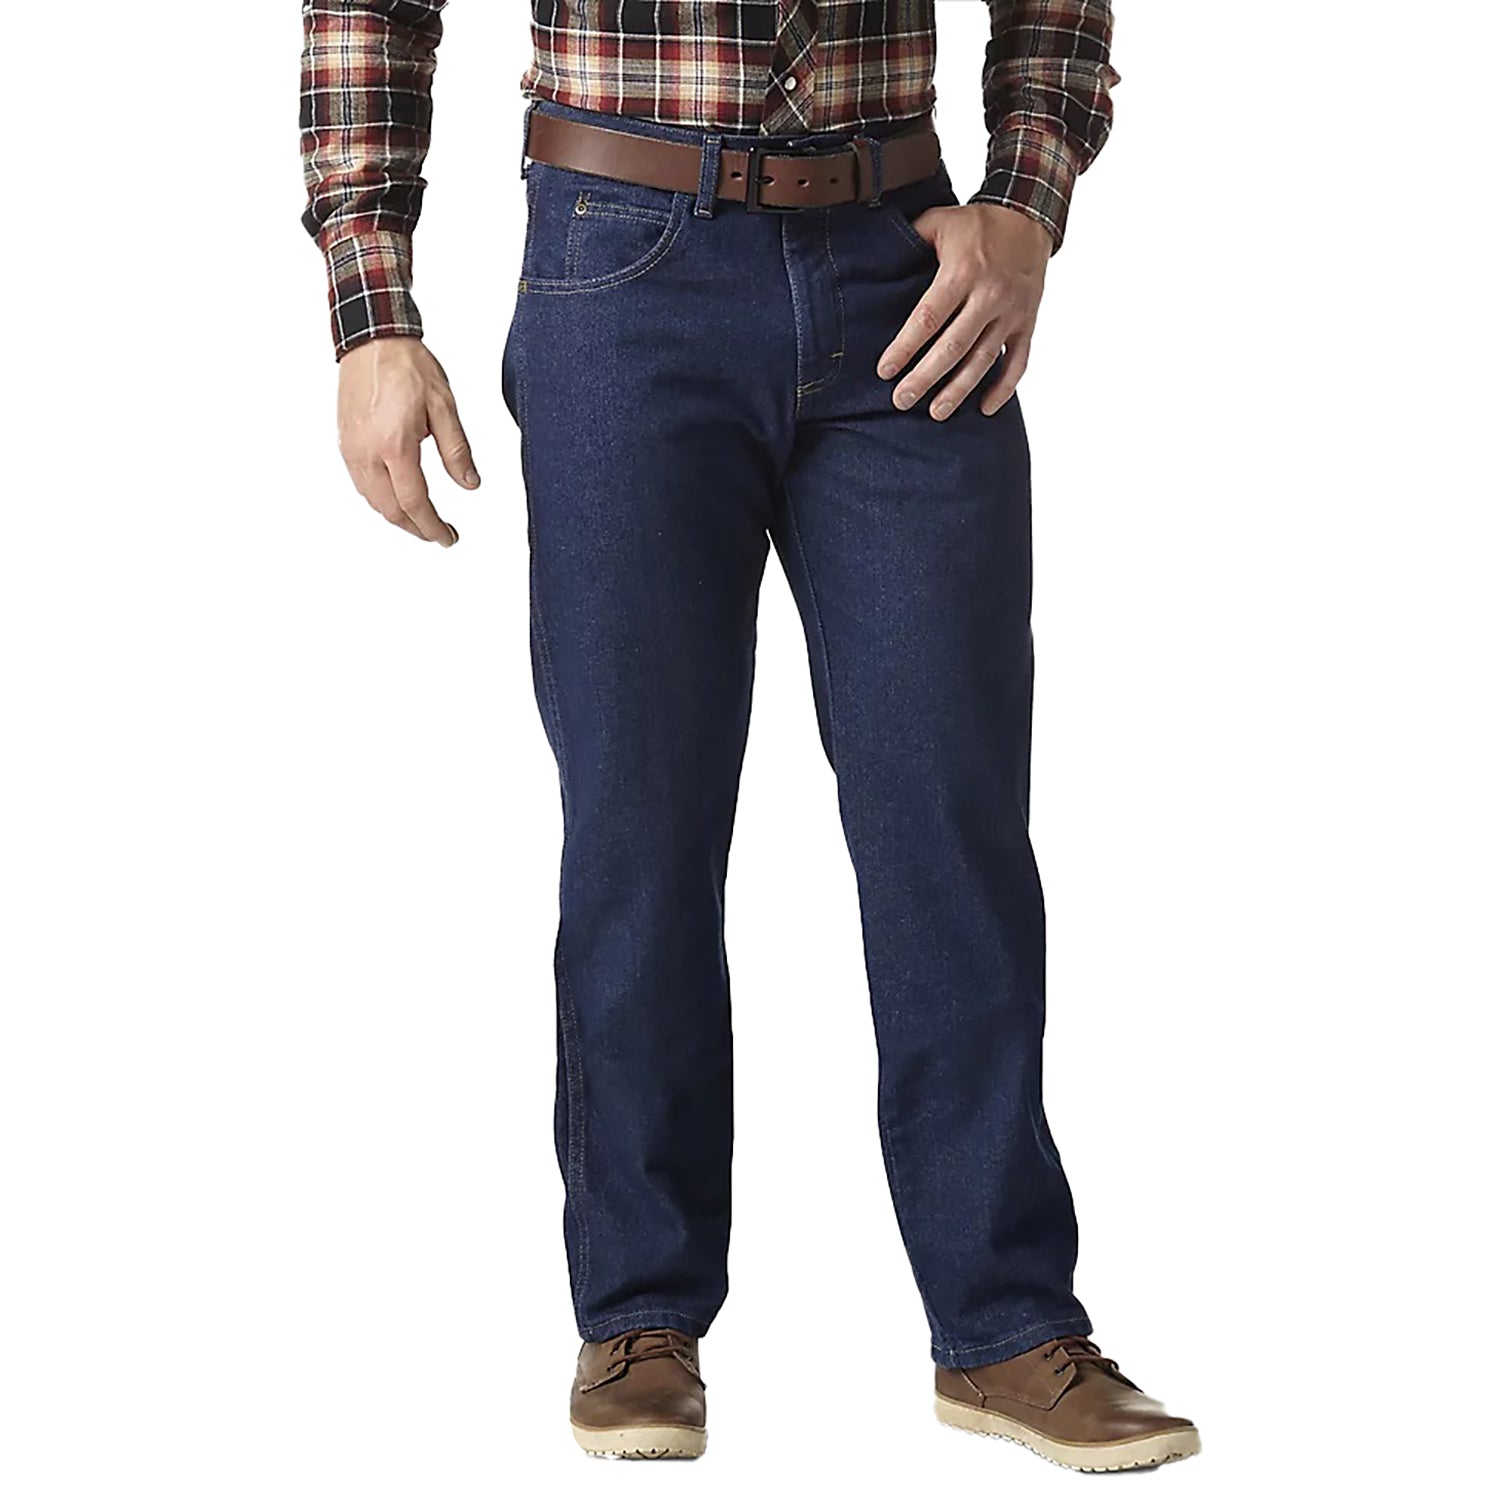 Wrangler Rugged Wear Relaxed Fit Jean 35001AN – Good's Store Online